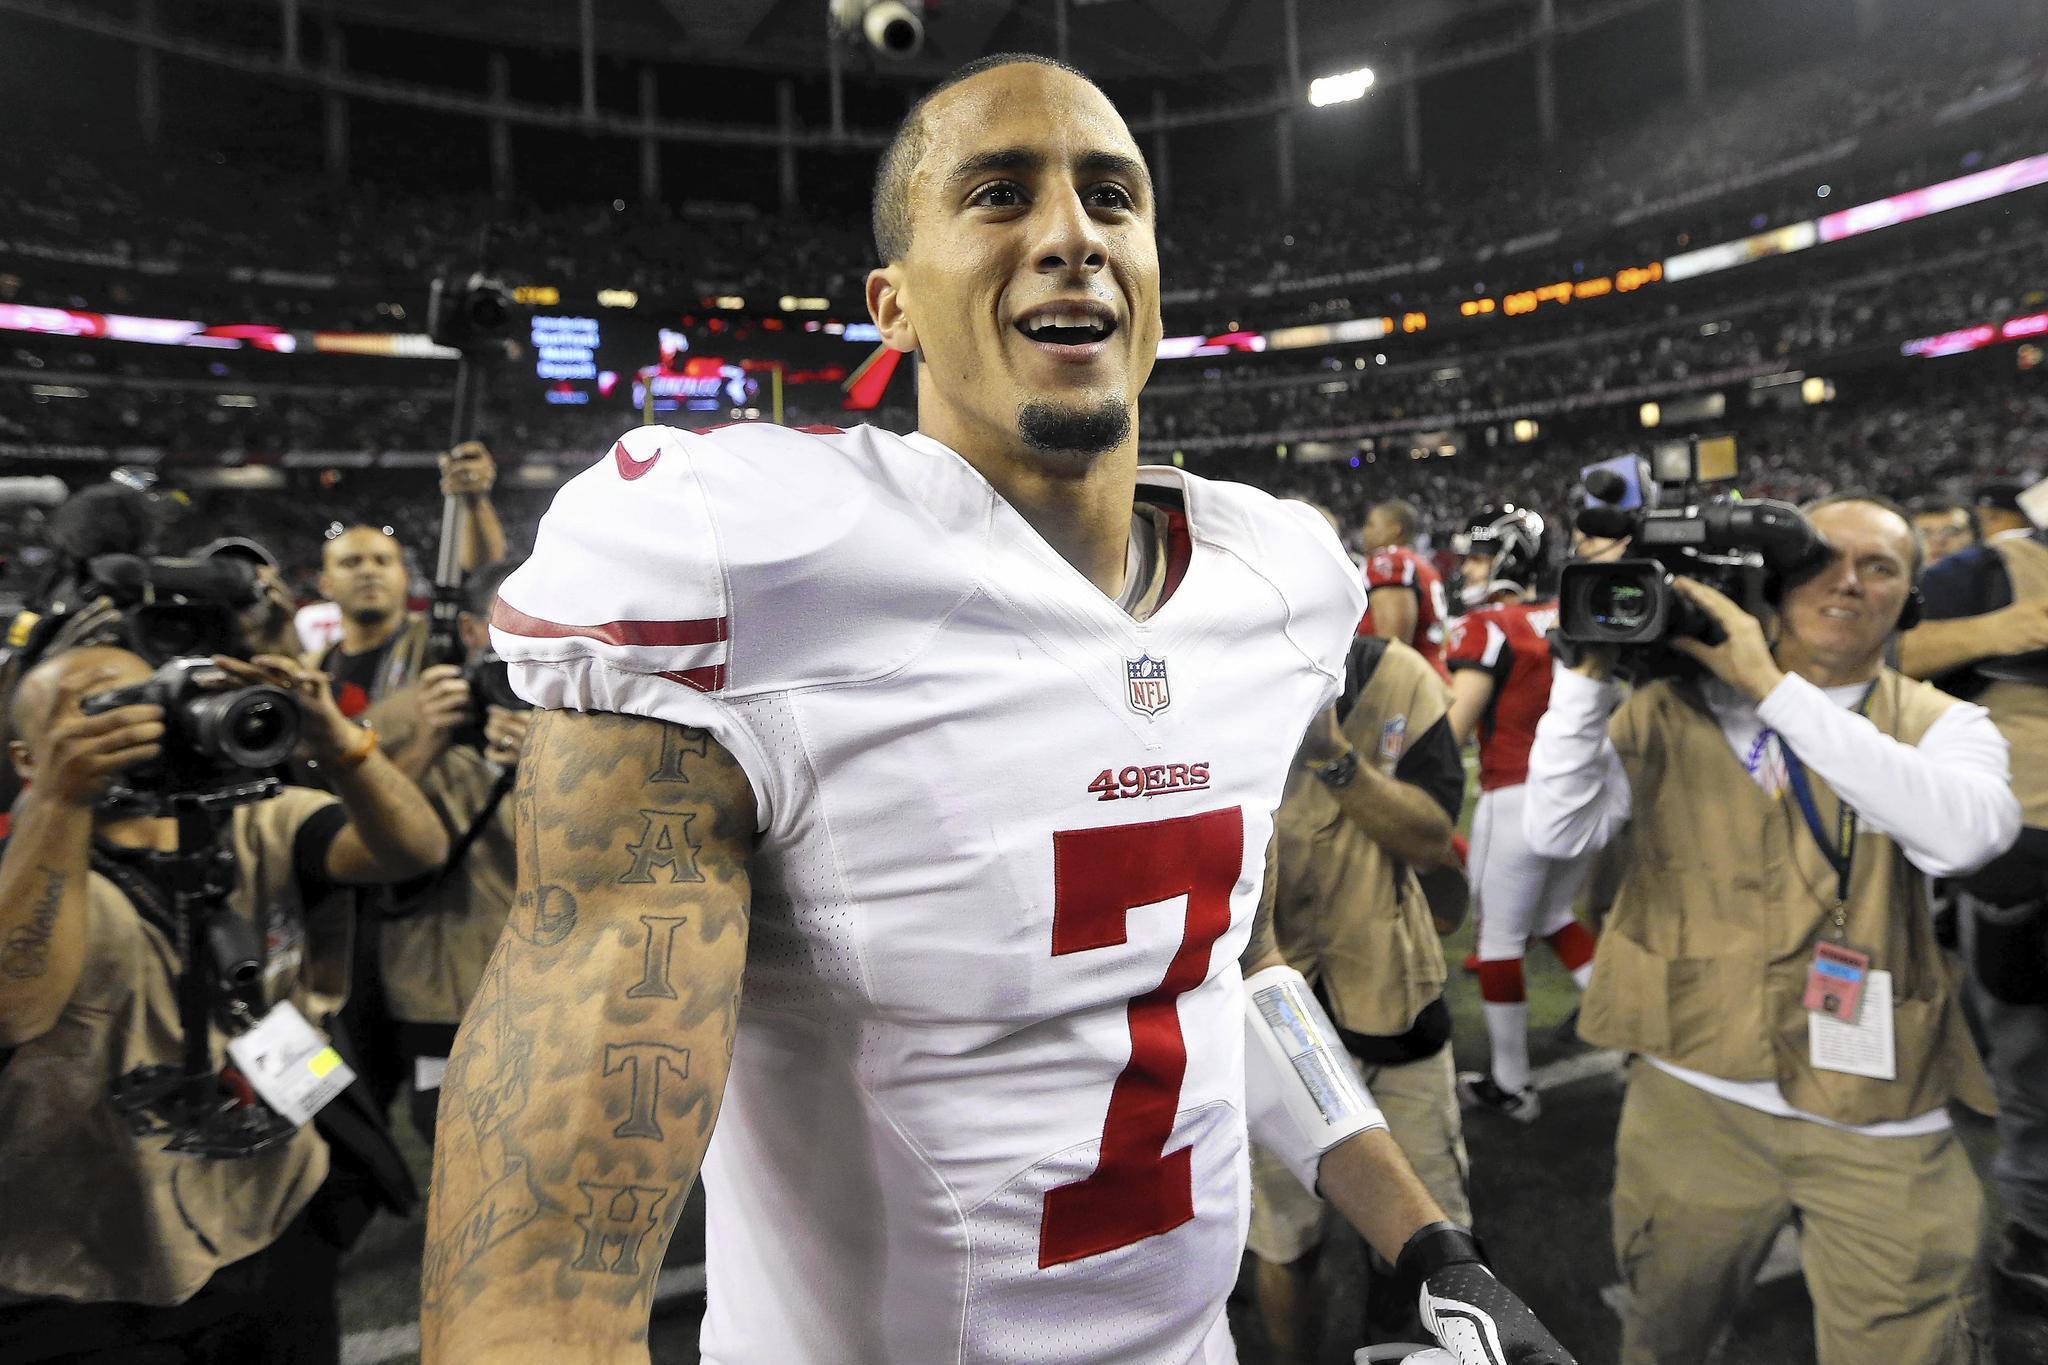 Colin Kaepernick's influence is outstanding - Orlando Sentinel2048 x 1365